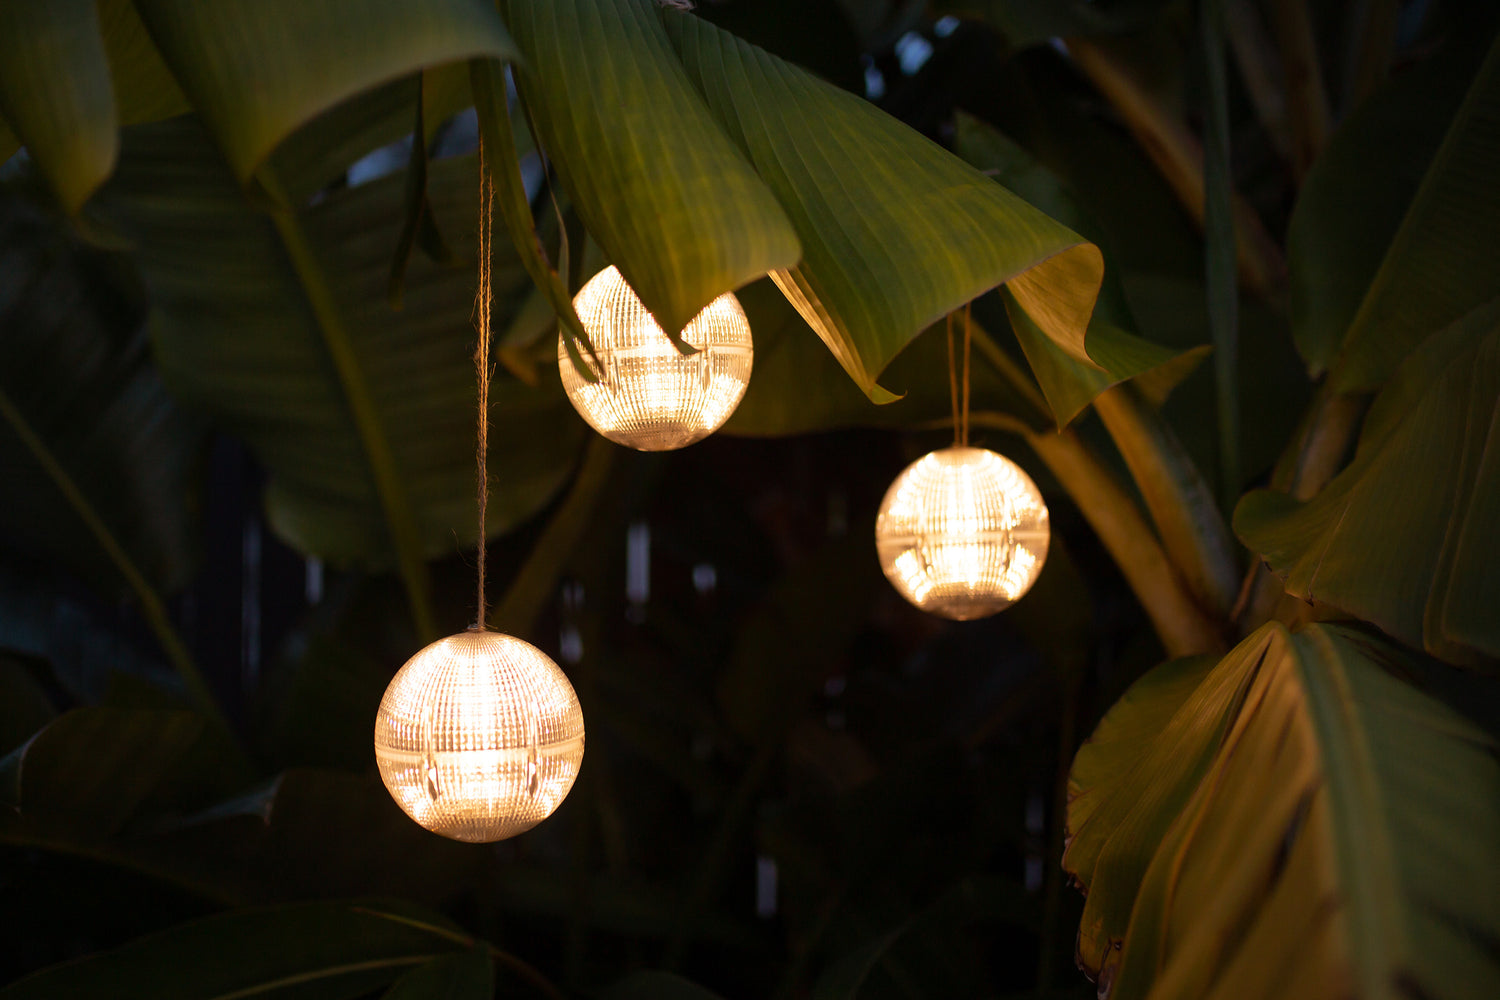 Three Solar Garden Globe Lights hanging by twine from the leaf of a large banana plant